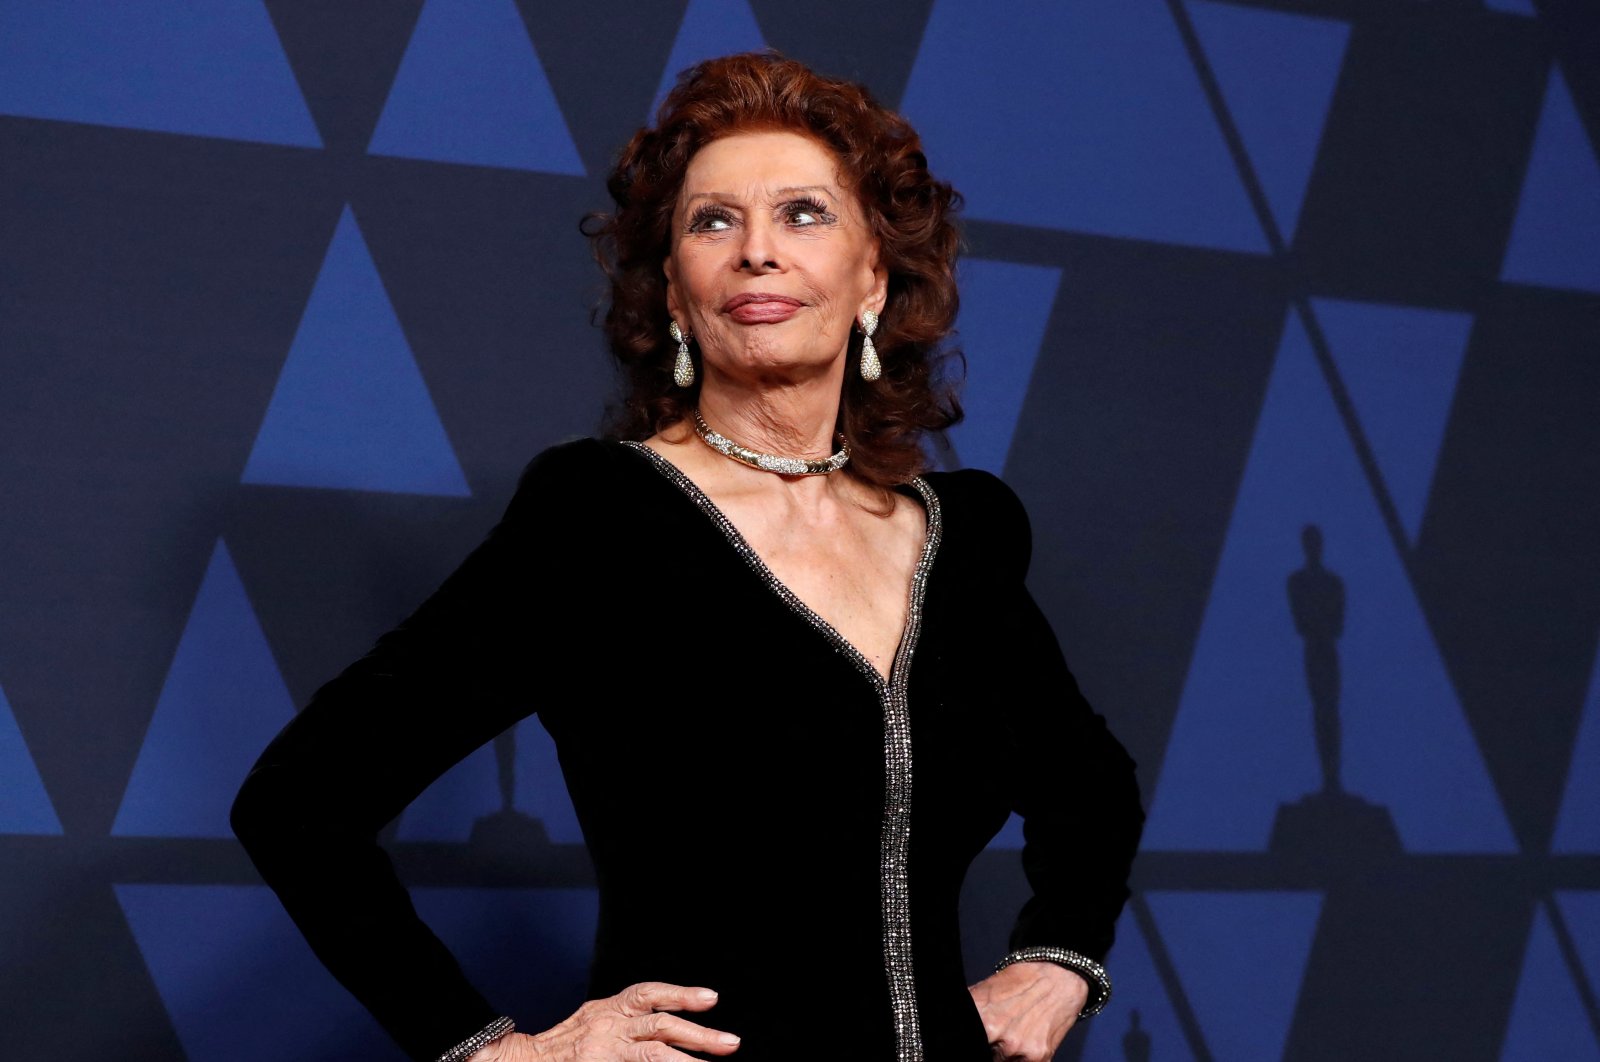 Sophia Loren arrives at the 2019 Governors Awards - Arrivals - Hollywood, California, U.S., Oct. 27, 2019. (Reuters Photo)